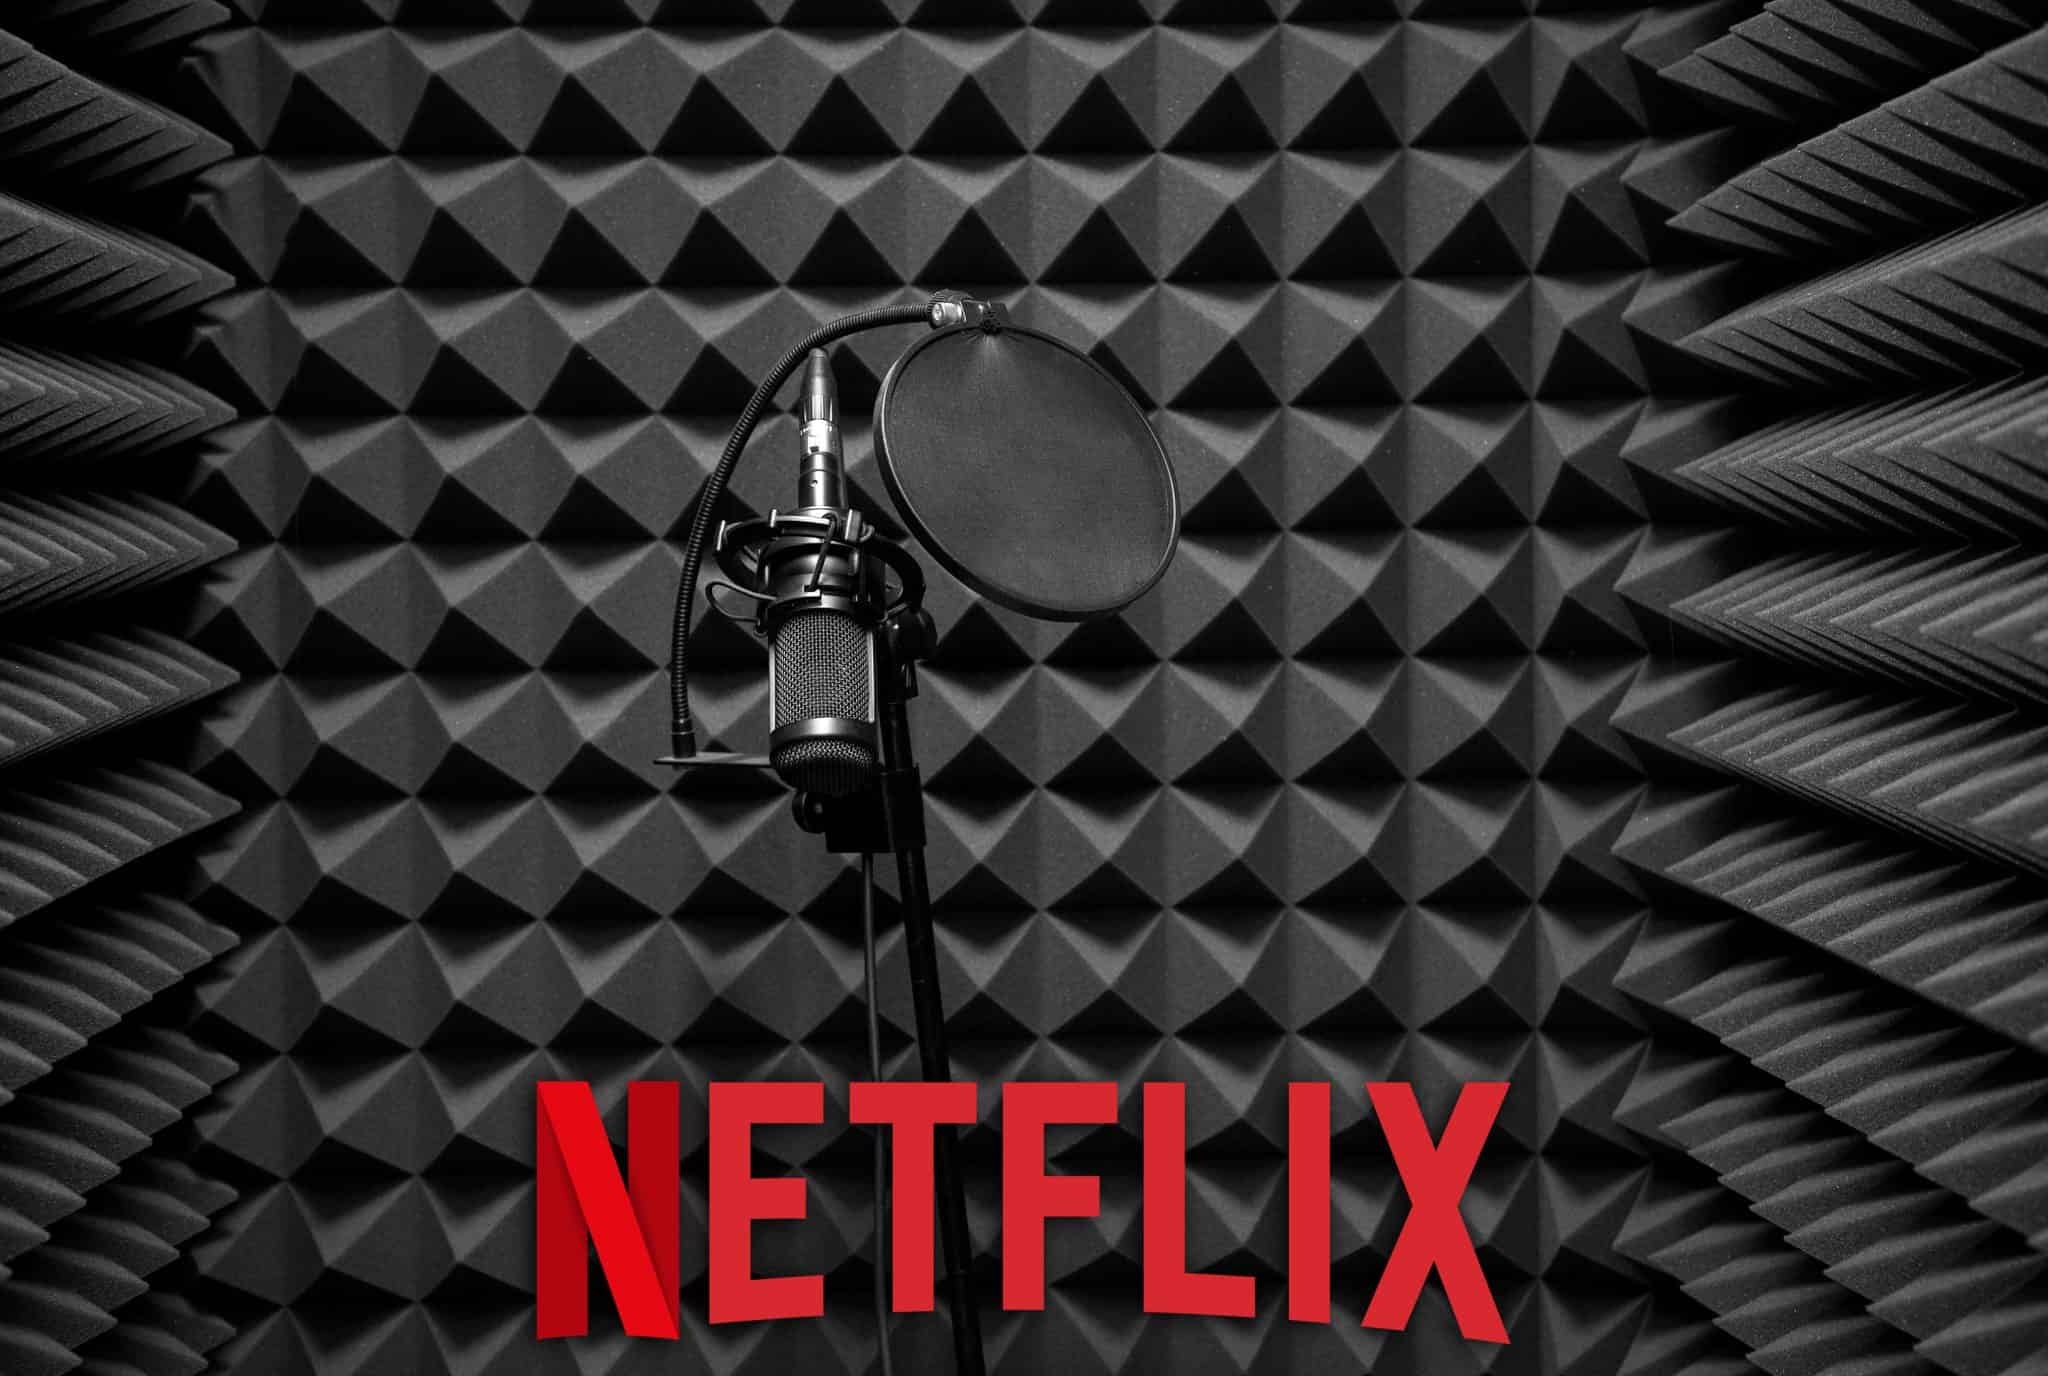 What Studios and How Are Netflix Dubbings Made?